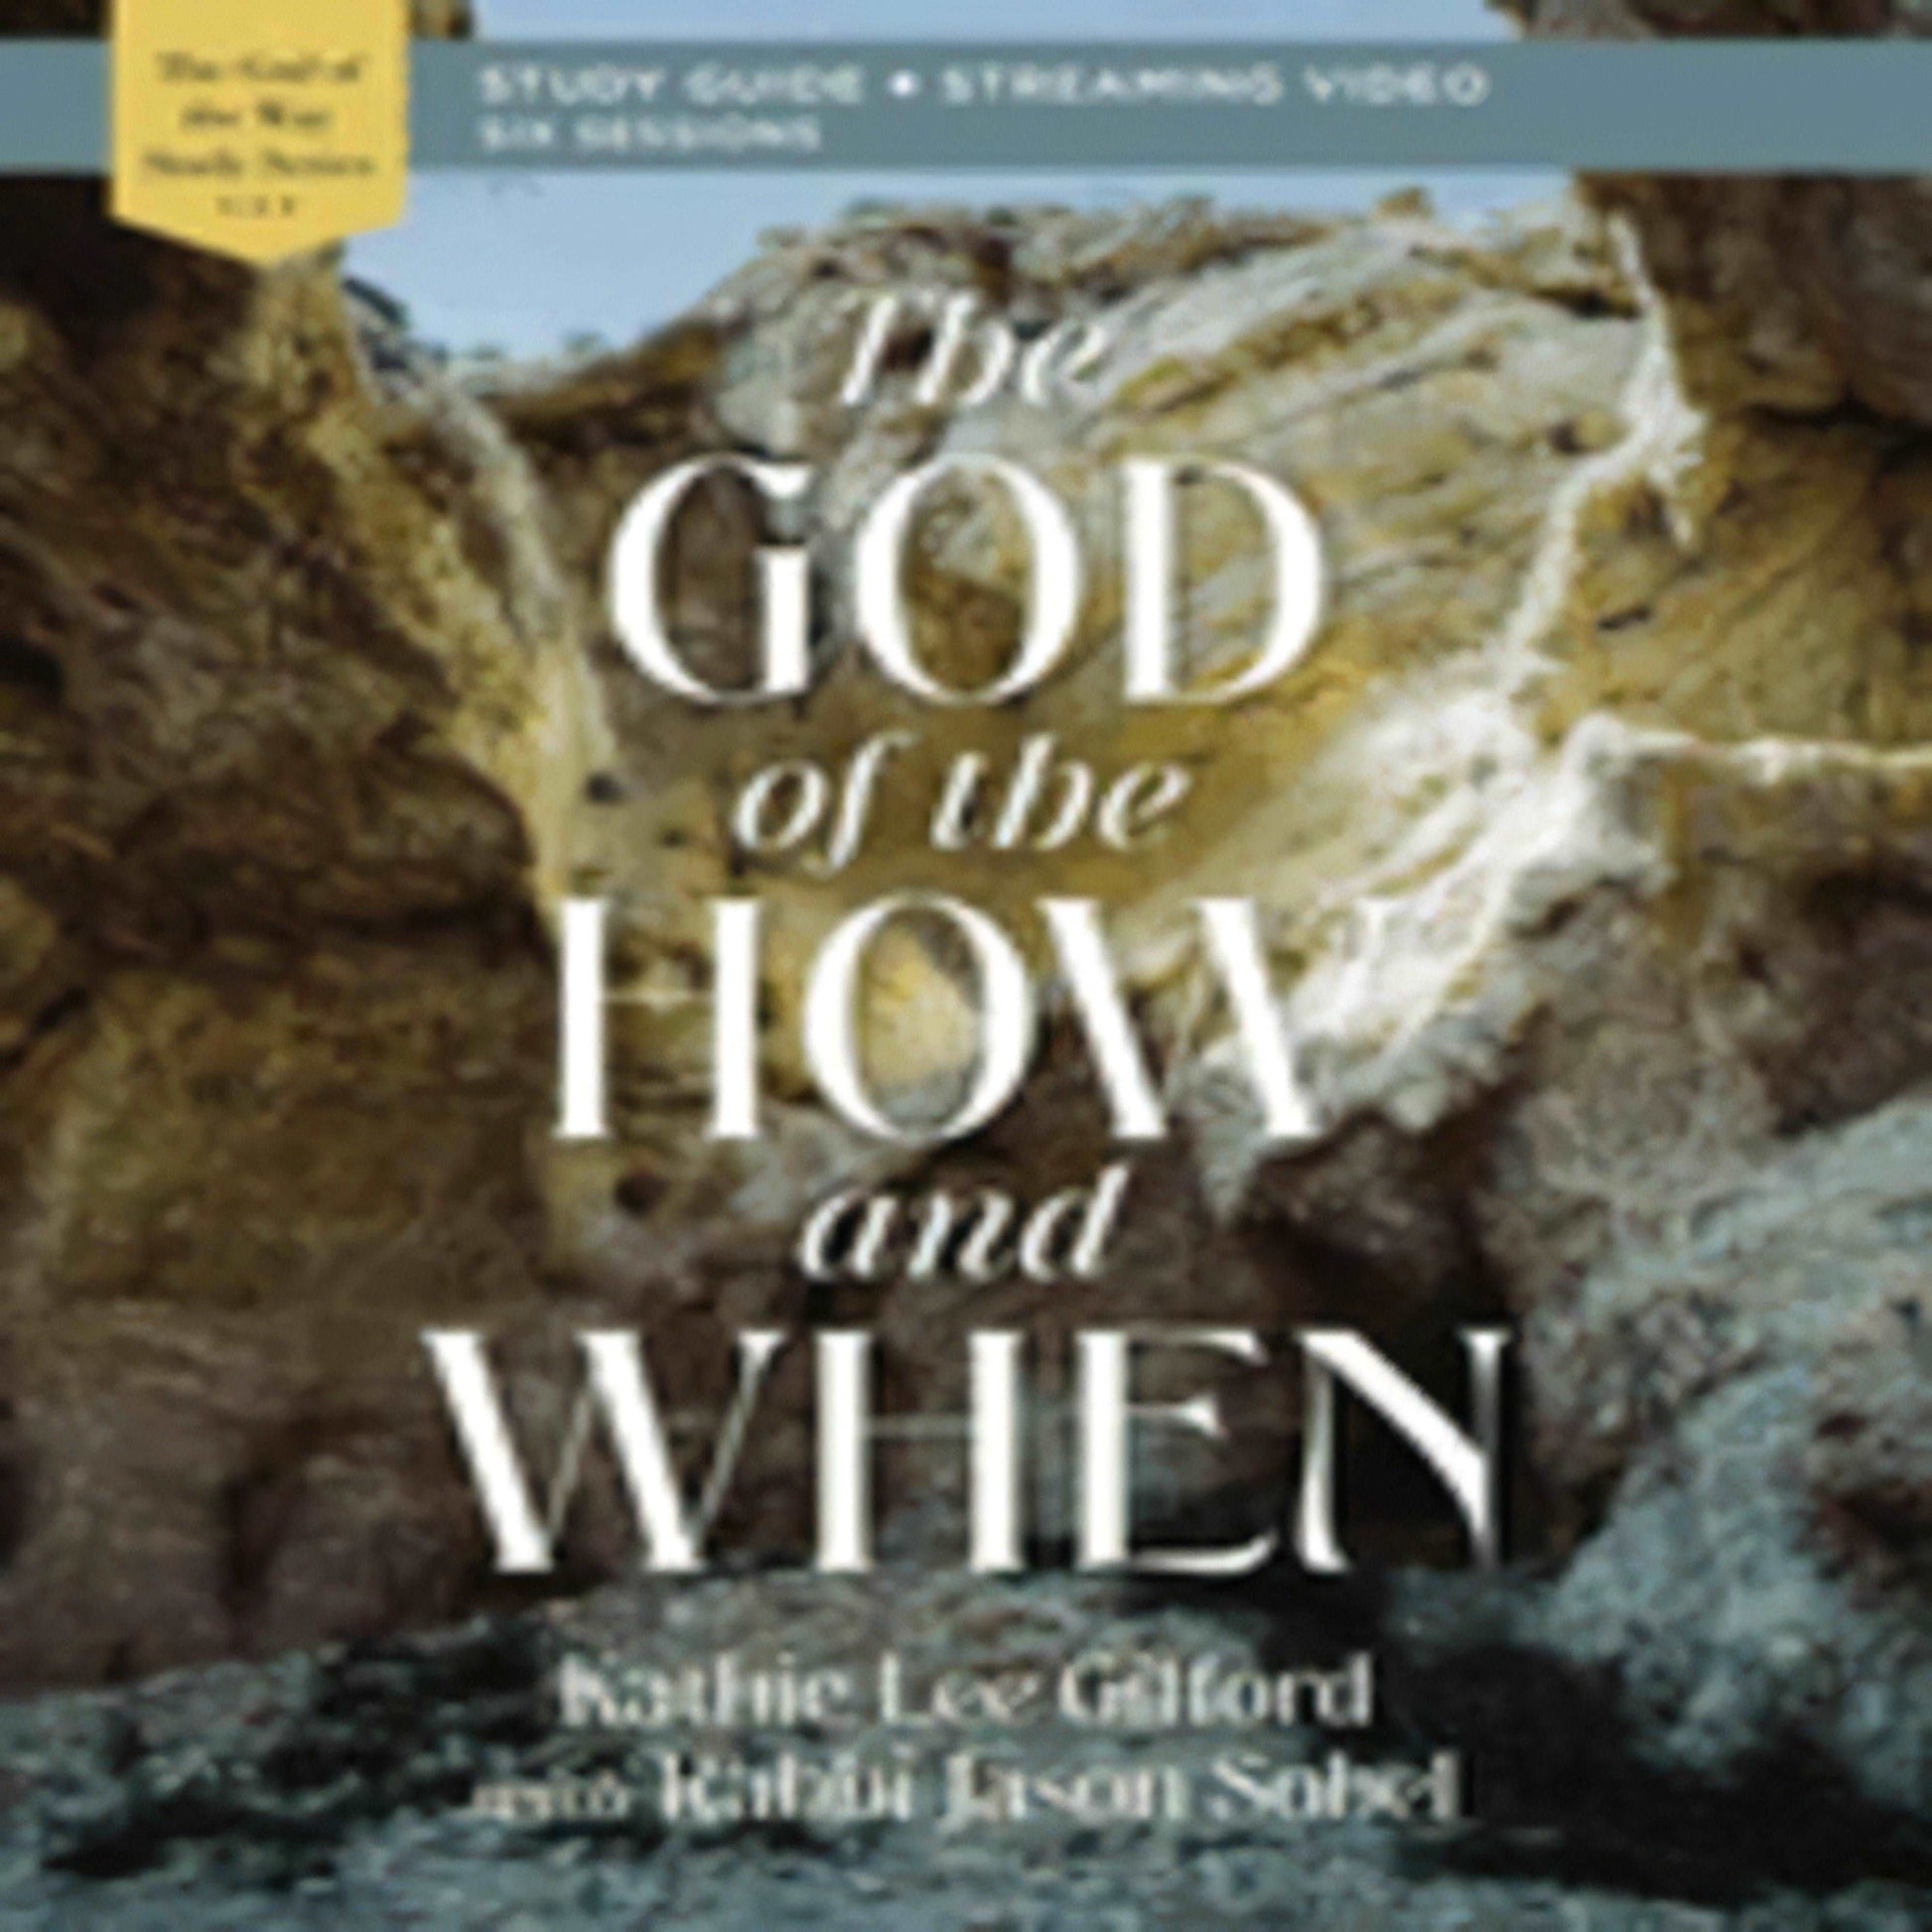 The God of the How and When Bible Study Guide Plus Streaming Video (God of the Way)265-032023-0310156548DPGBOOKSTORE.COM. Today's Bestsellers.